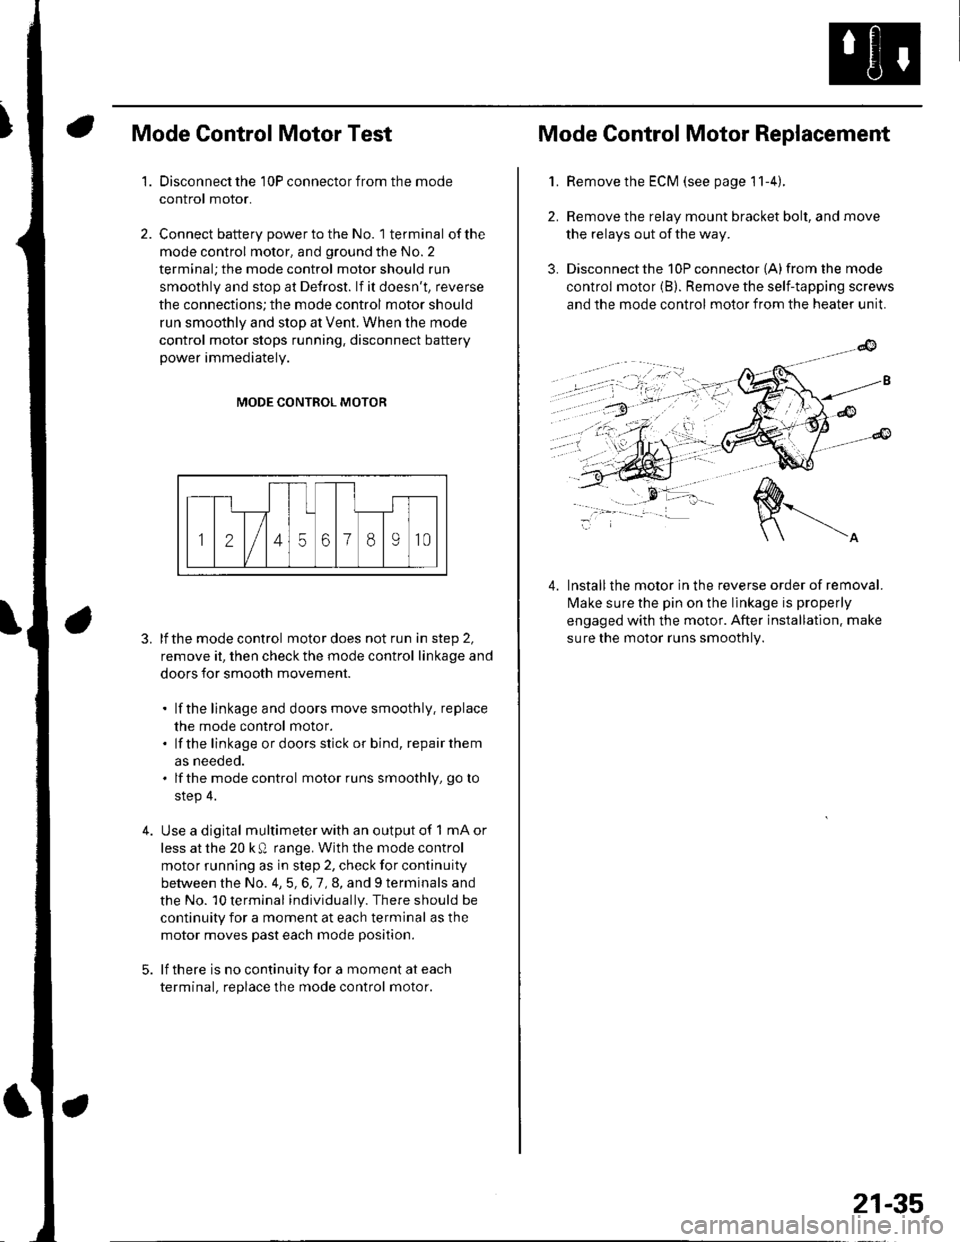 HONDA CIVIC 2003 7.G Service Manual Mode Control Motor Test
Disconnect the 10P connector from the mode
control motor.
Connect battery power to the No. 1 terminal of the
mode control motor, and ground the No. 2
terminal; the mode control